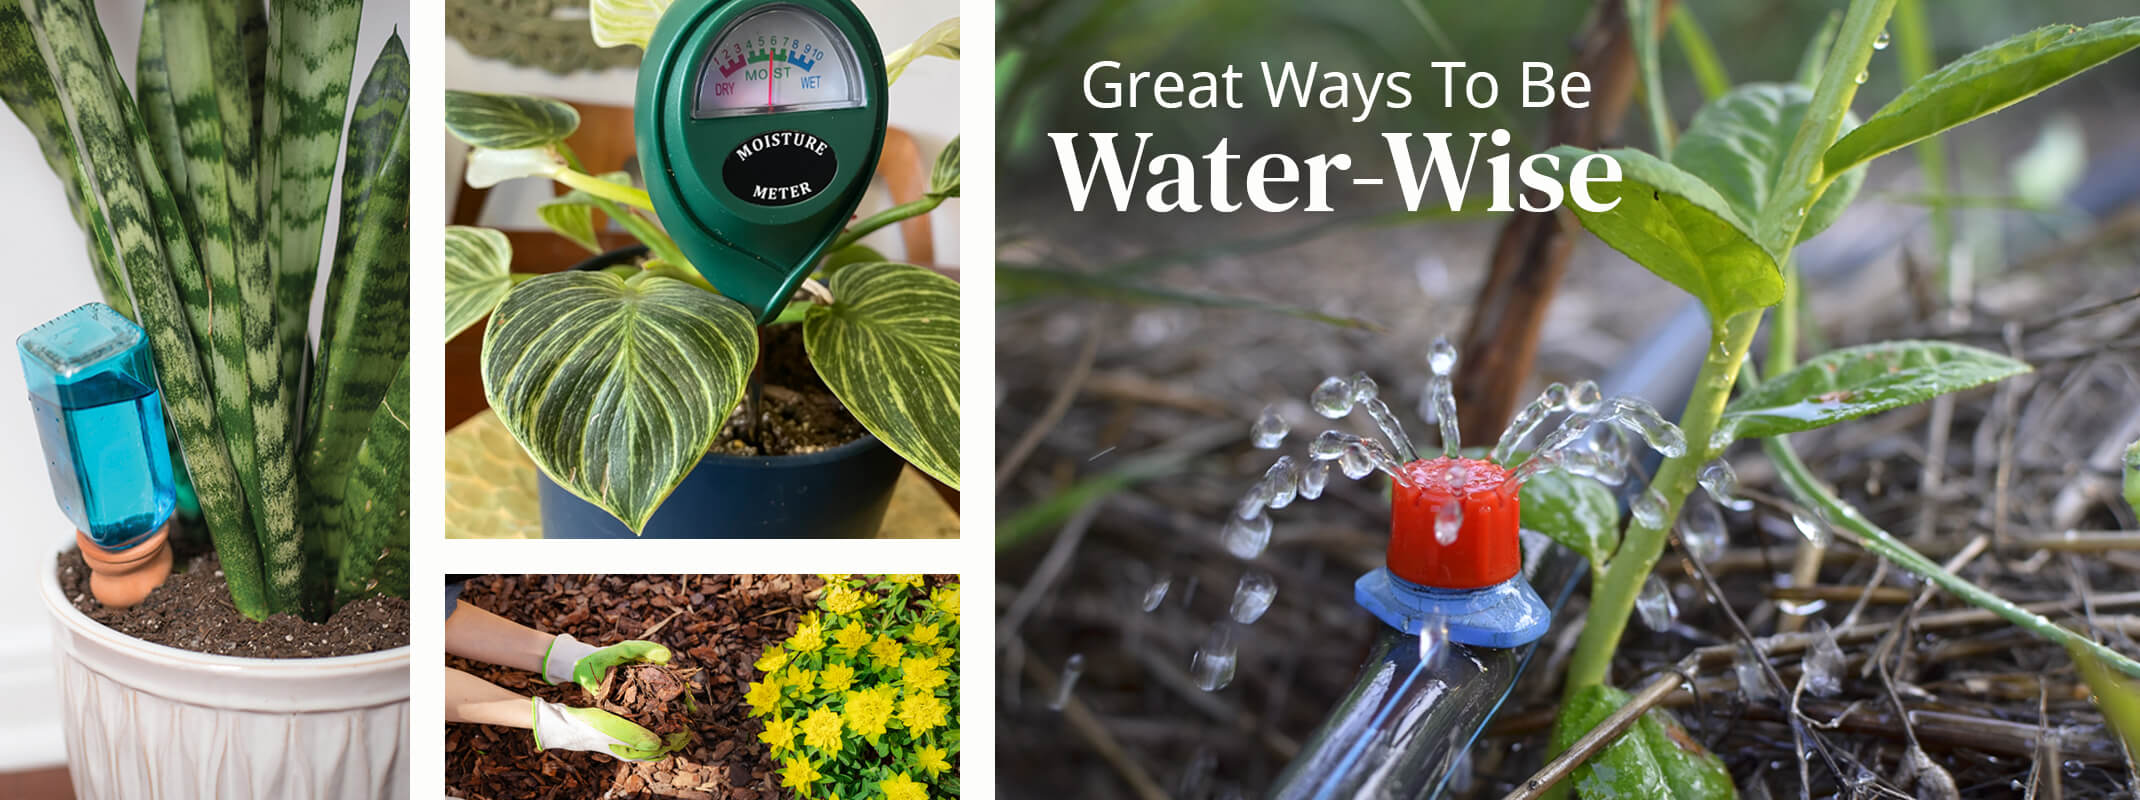 Water wise gardening and products to support, meter, drip system, mulch, plant pal